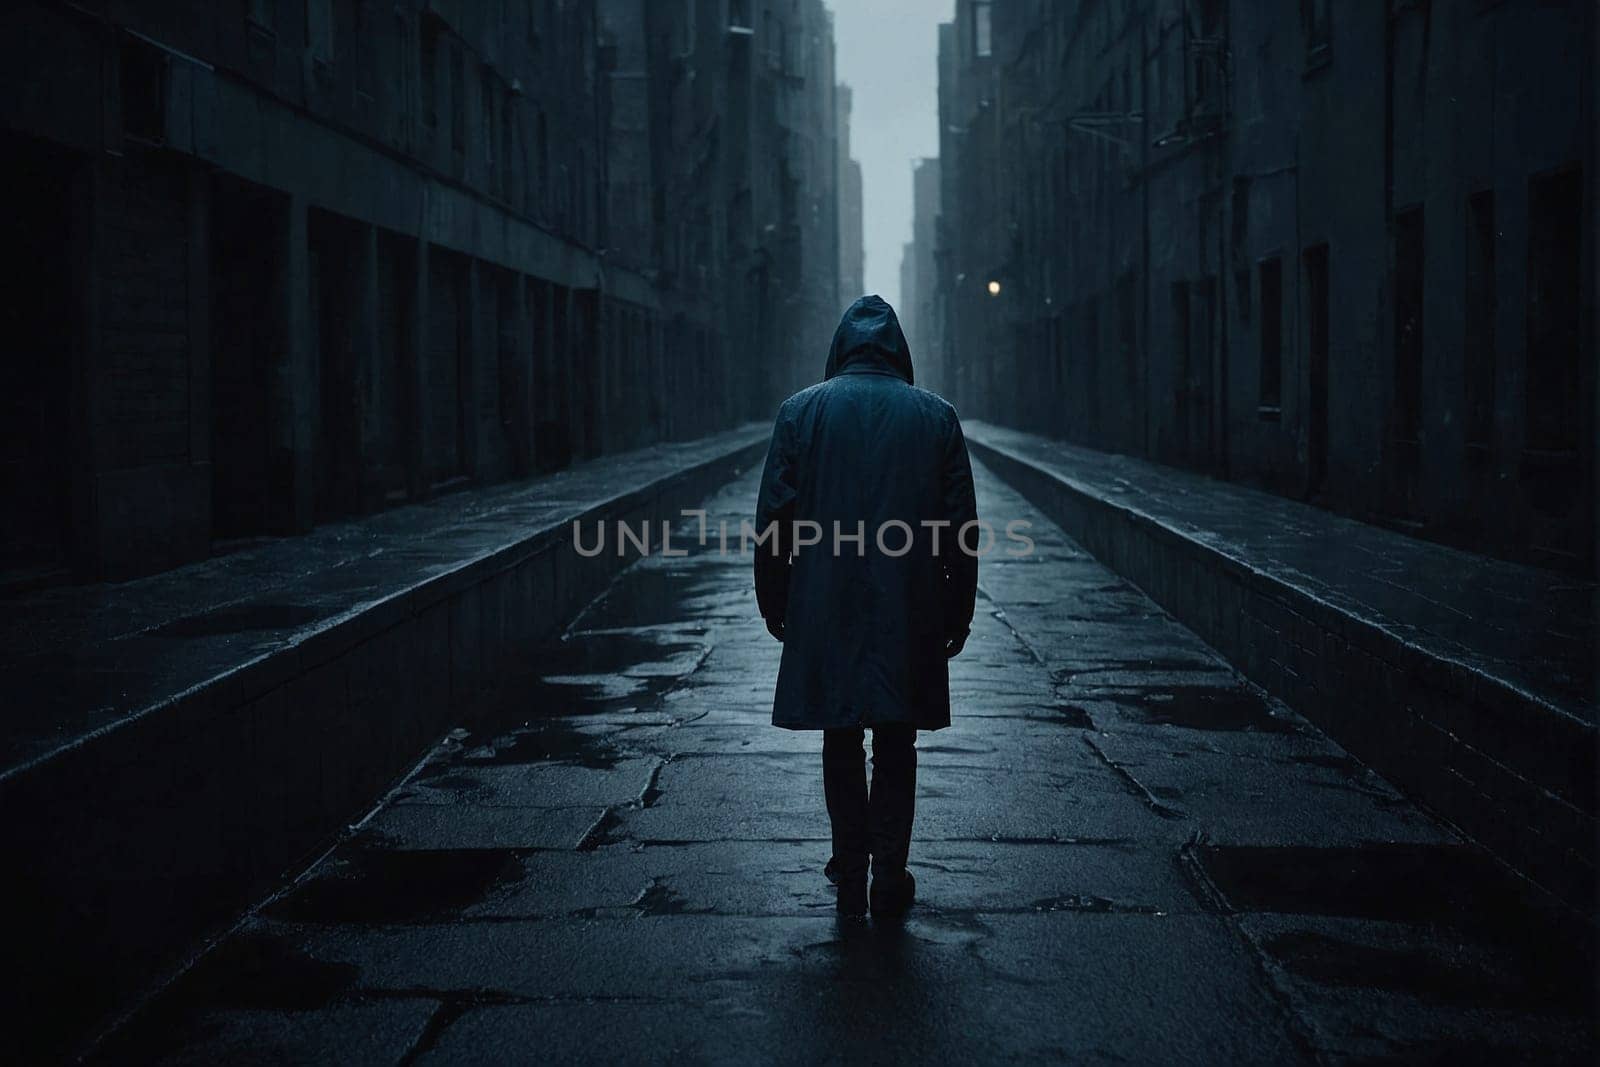 A person walks alone down a dimly lit street at night.